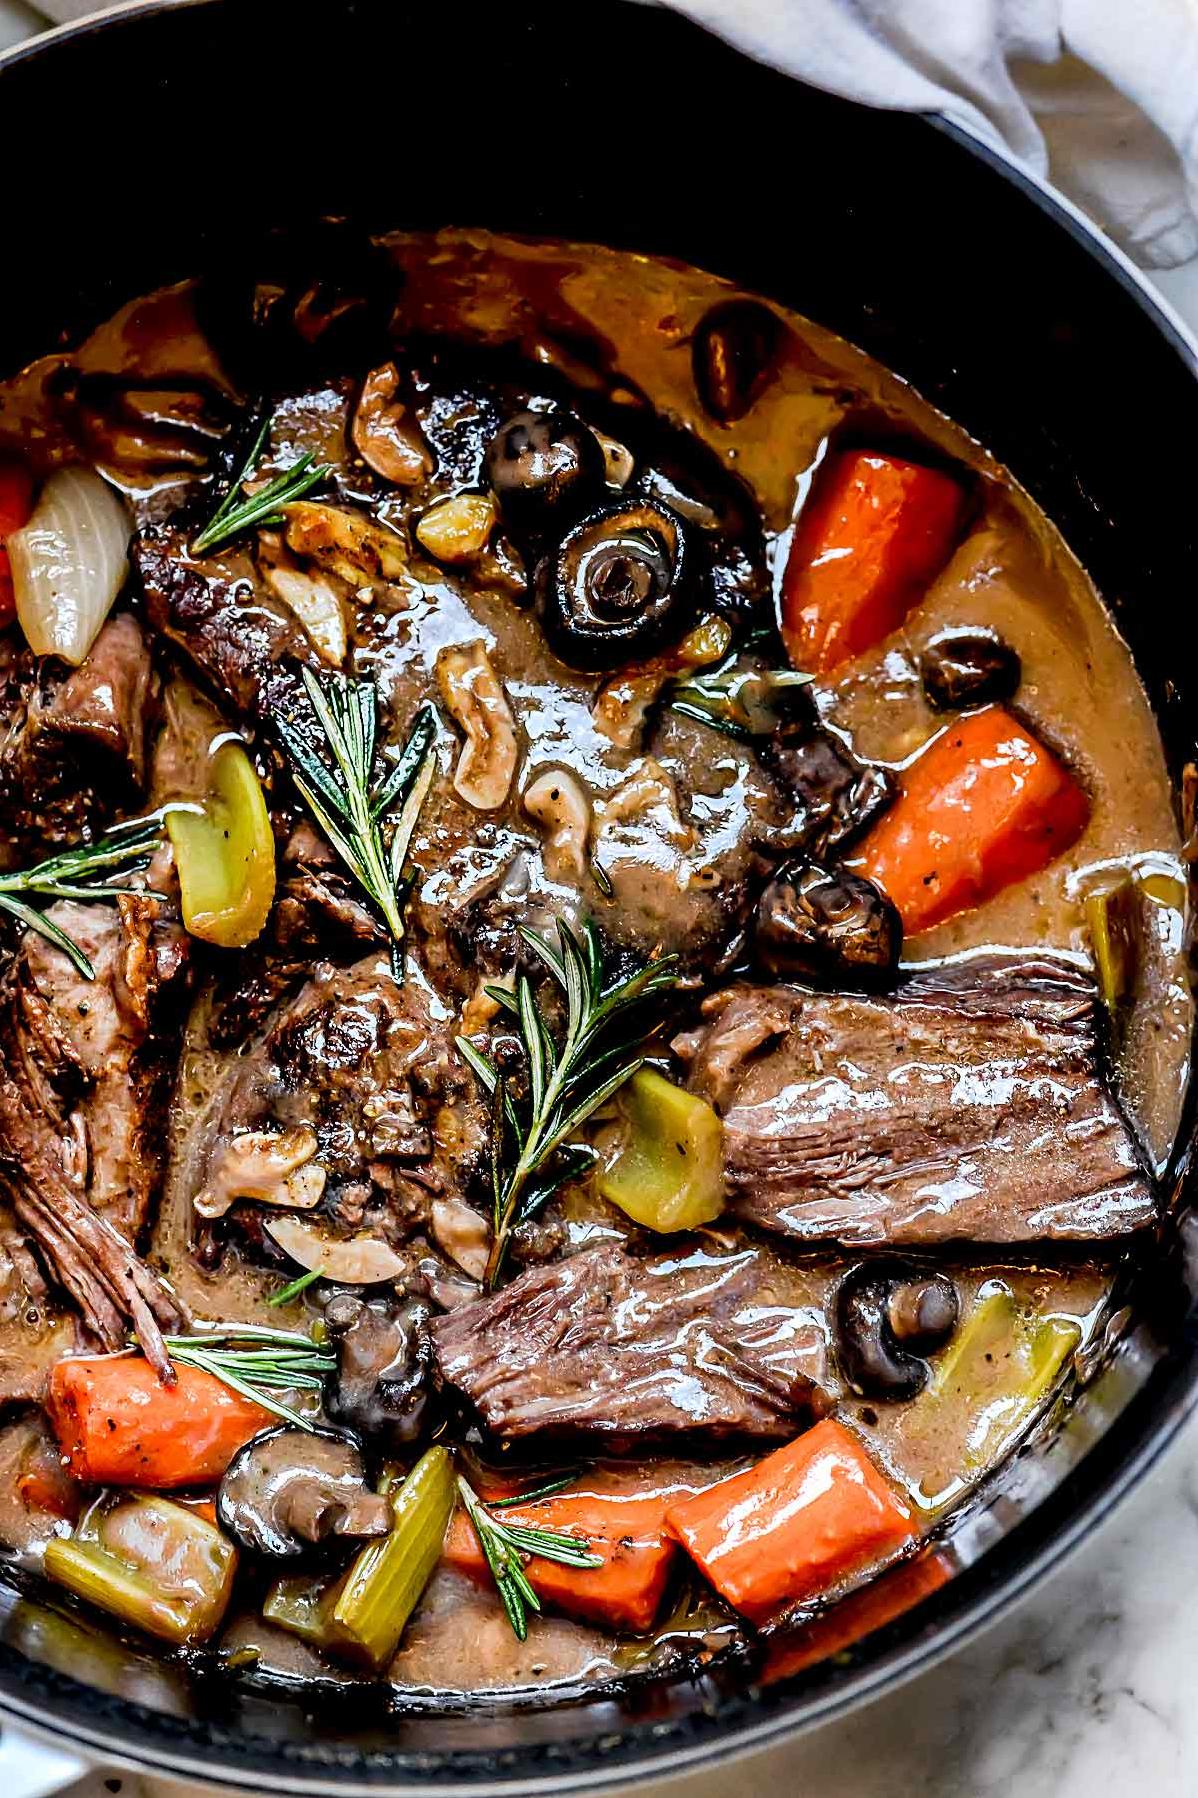  With its tender and juicy meat, this garlic-wine pot roast is a meal that will have your dinner guests asking for seconds.